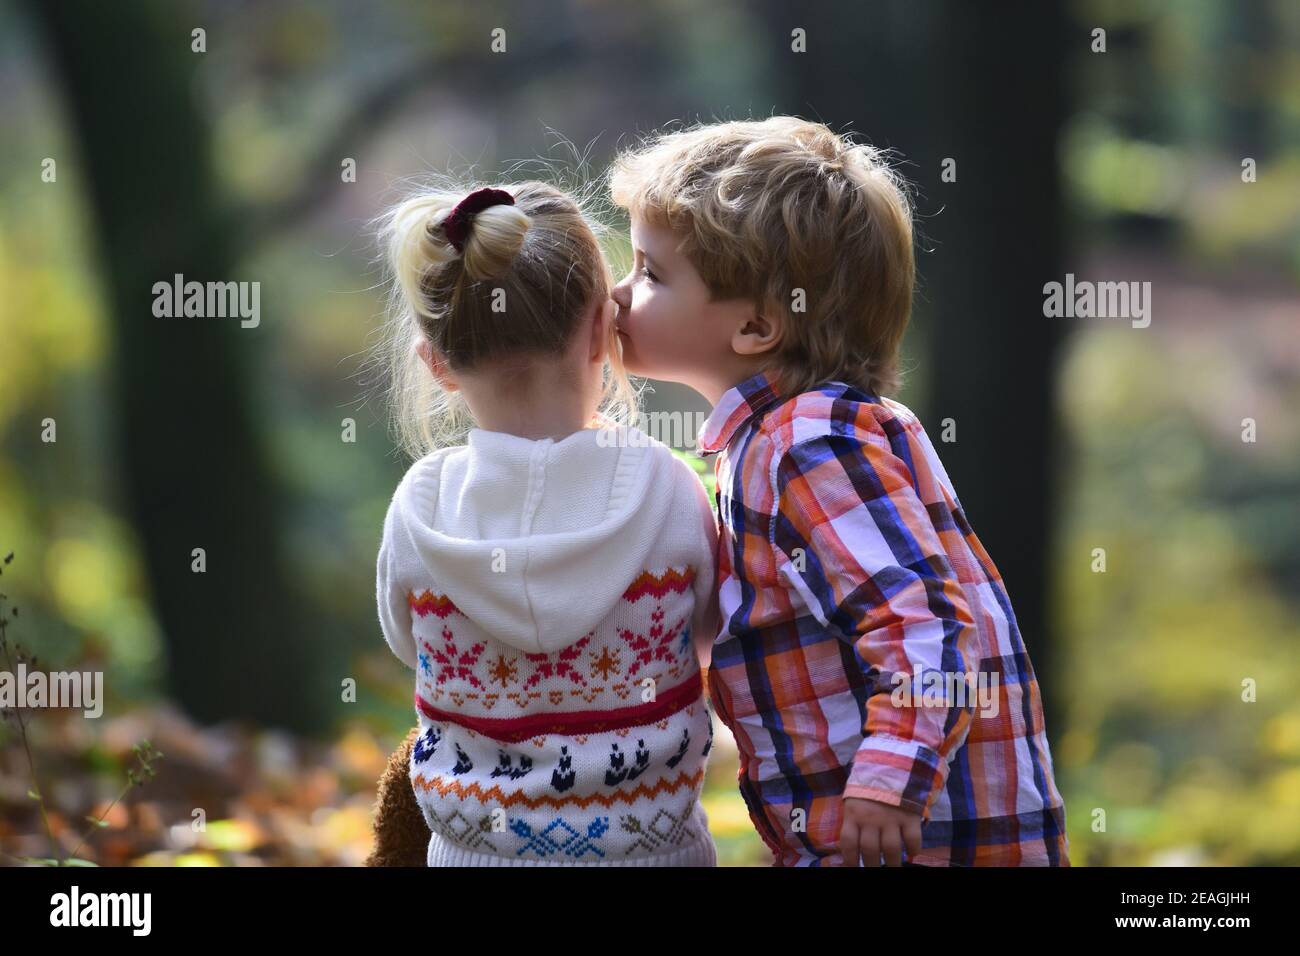 Little boy kiss small girl friend in autumn forest. Brother kiss ...